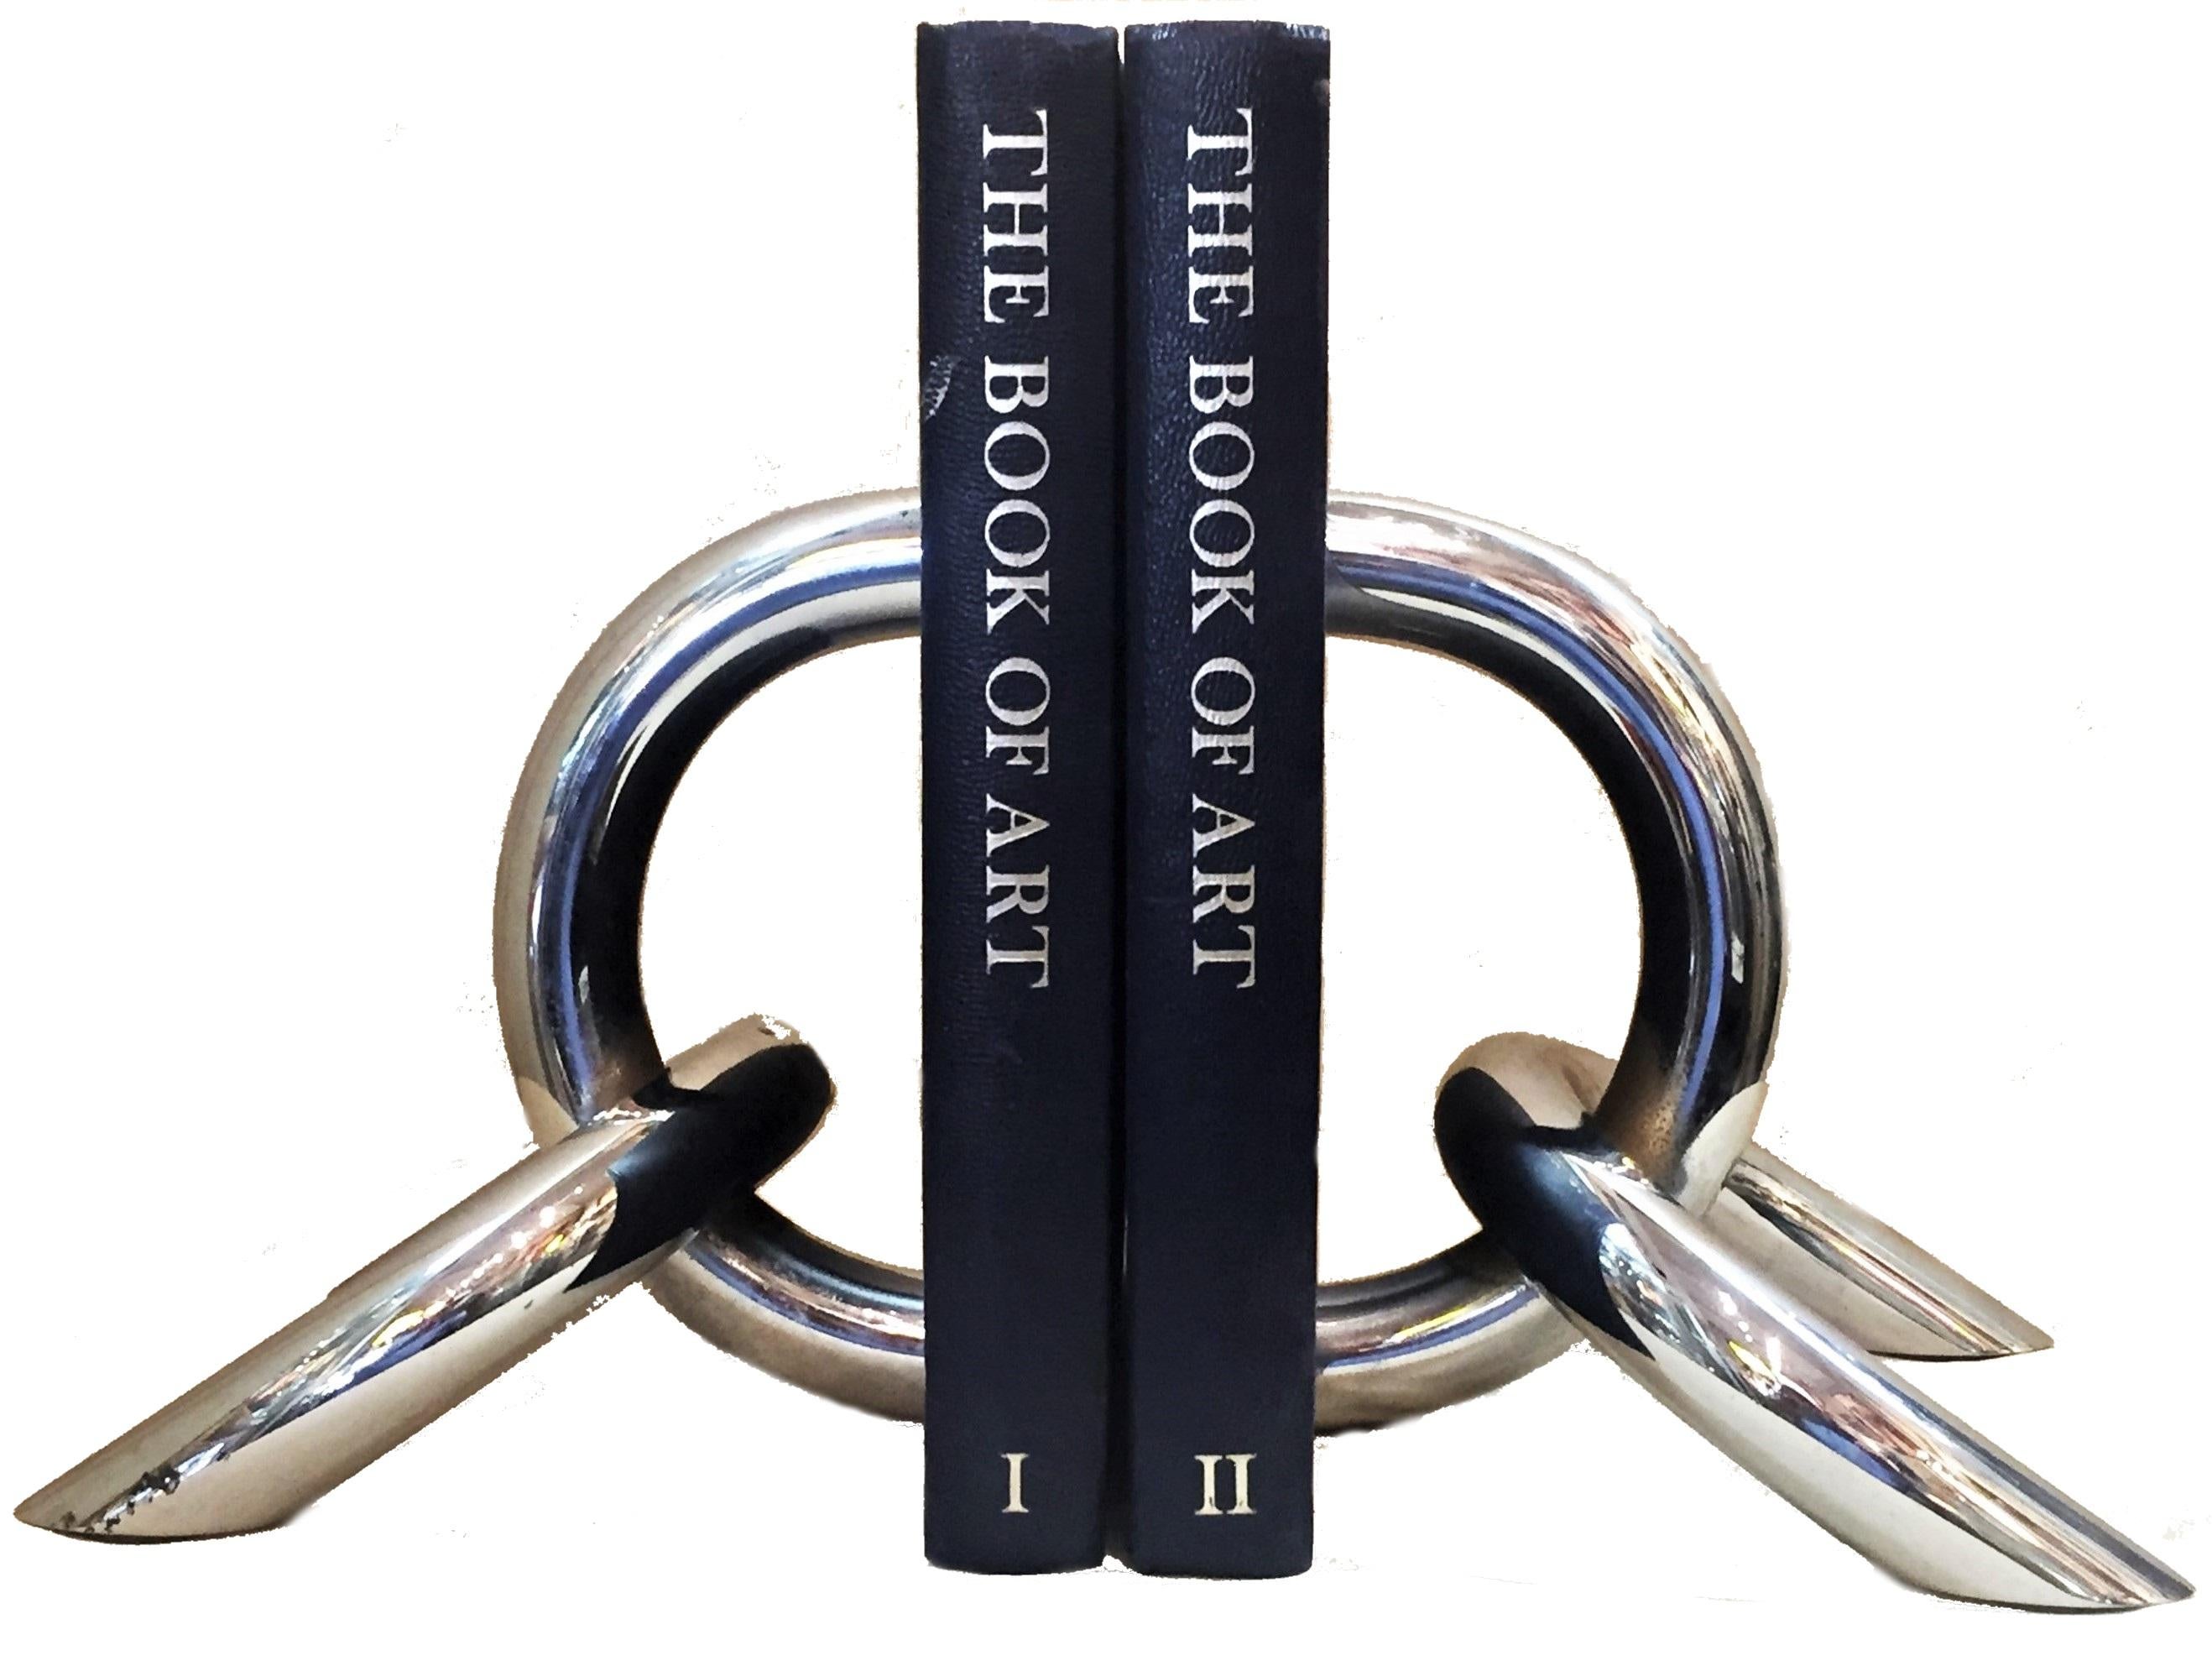 Pair of Italian Architectural Chromed Steel Chain Links Bookends, circa 1970 For Sale 1